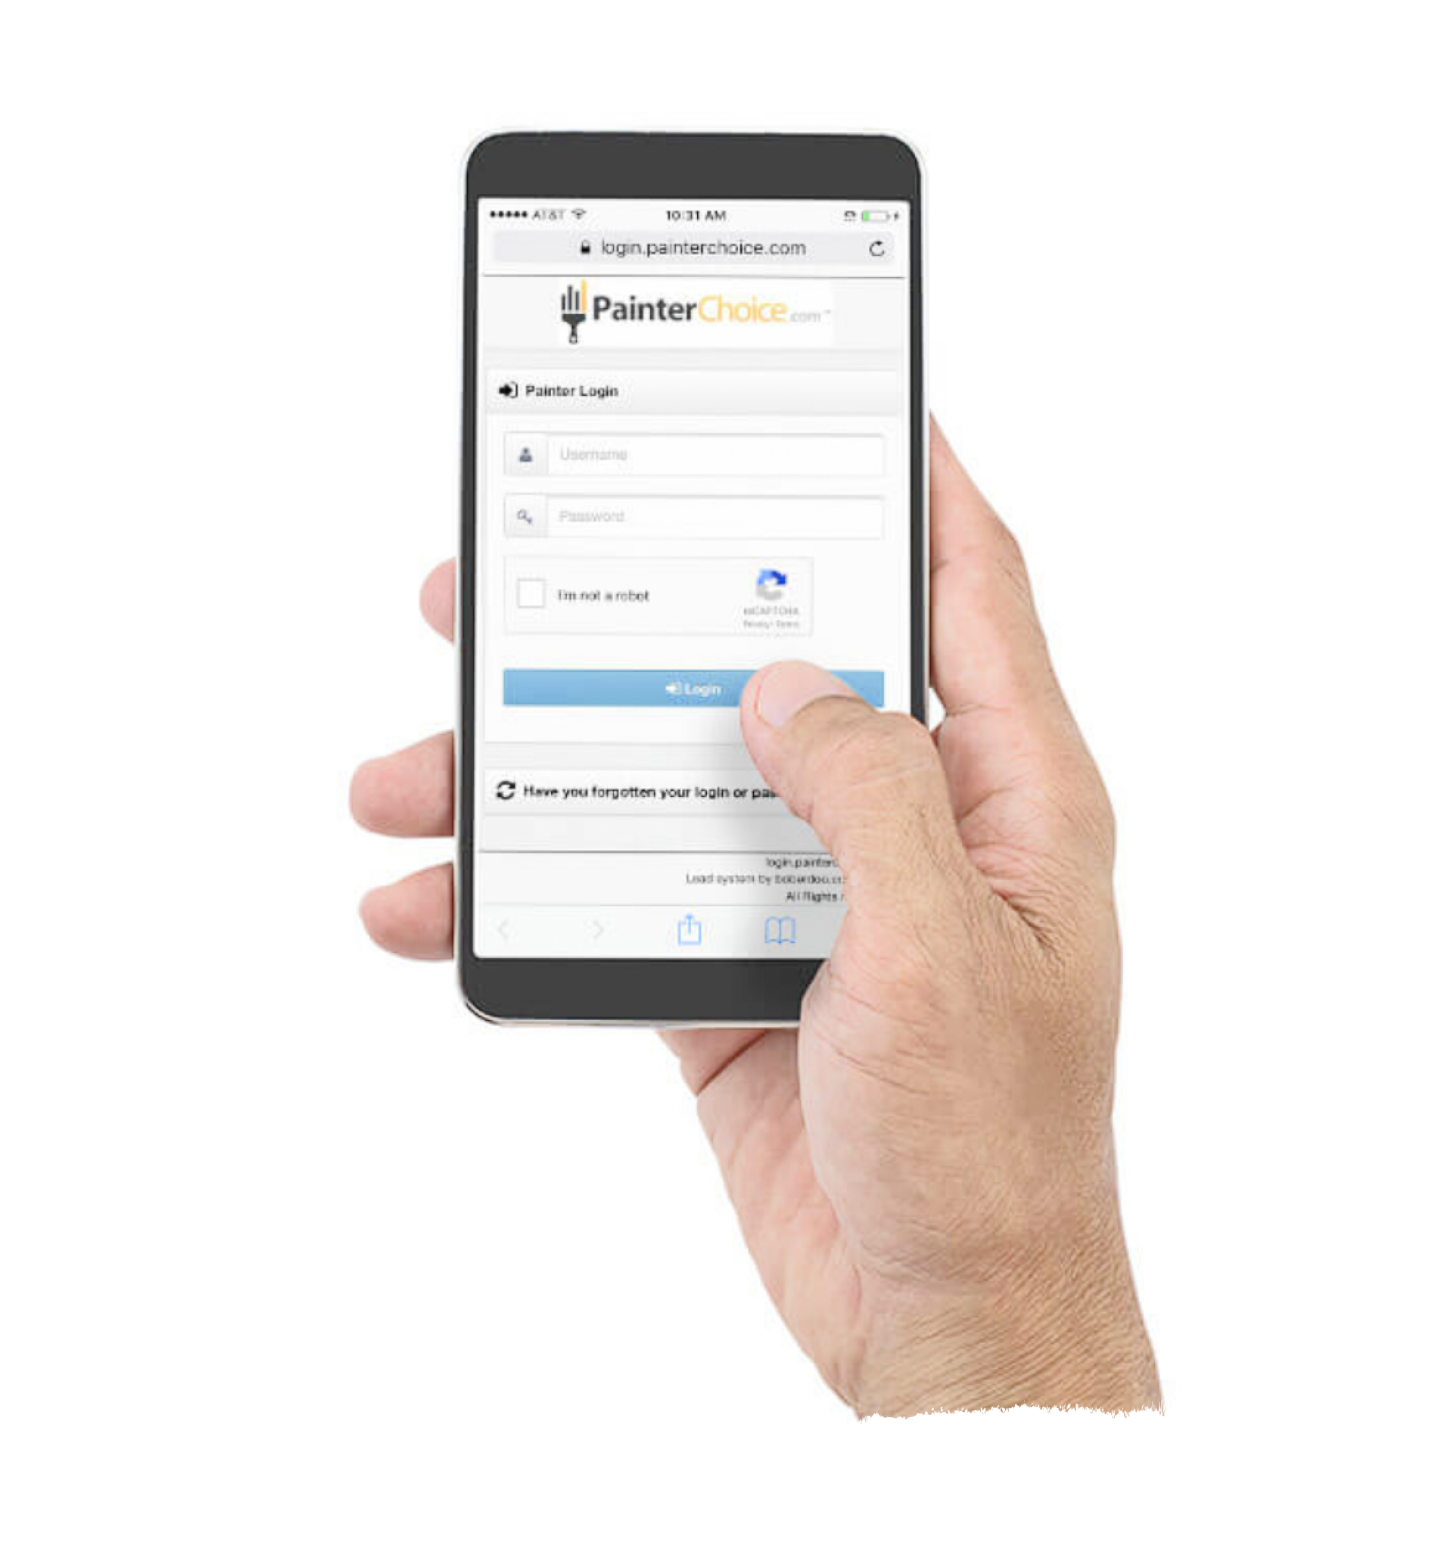 Image of a hand holding a phone with the PainterChoice app interface on it